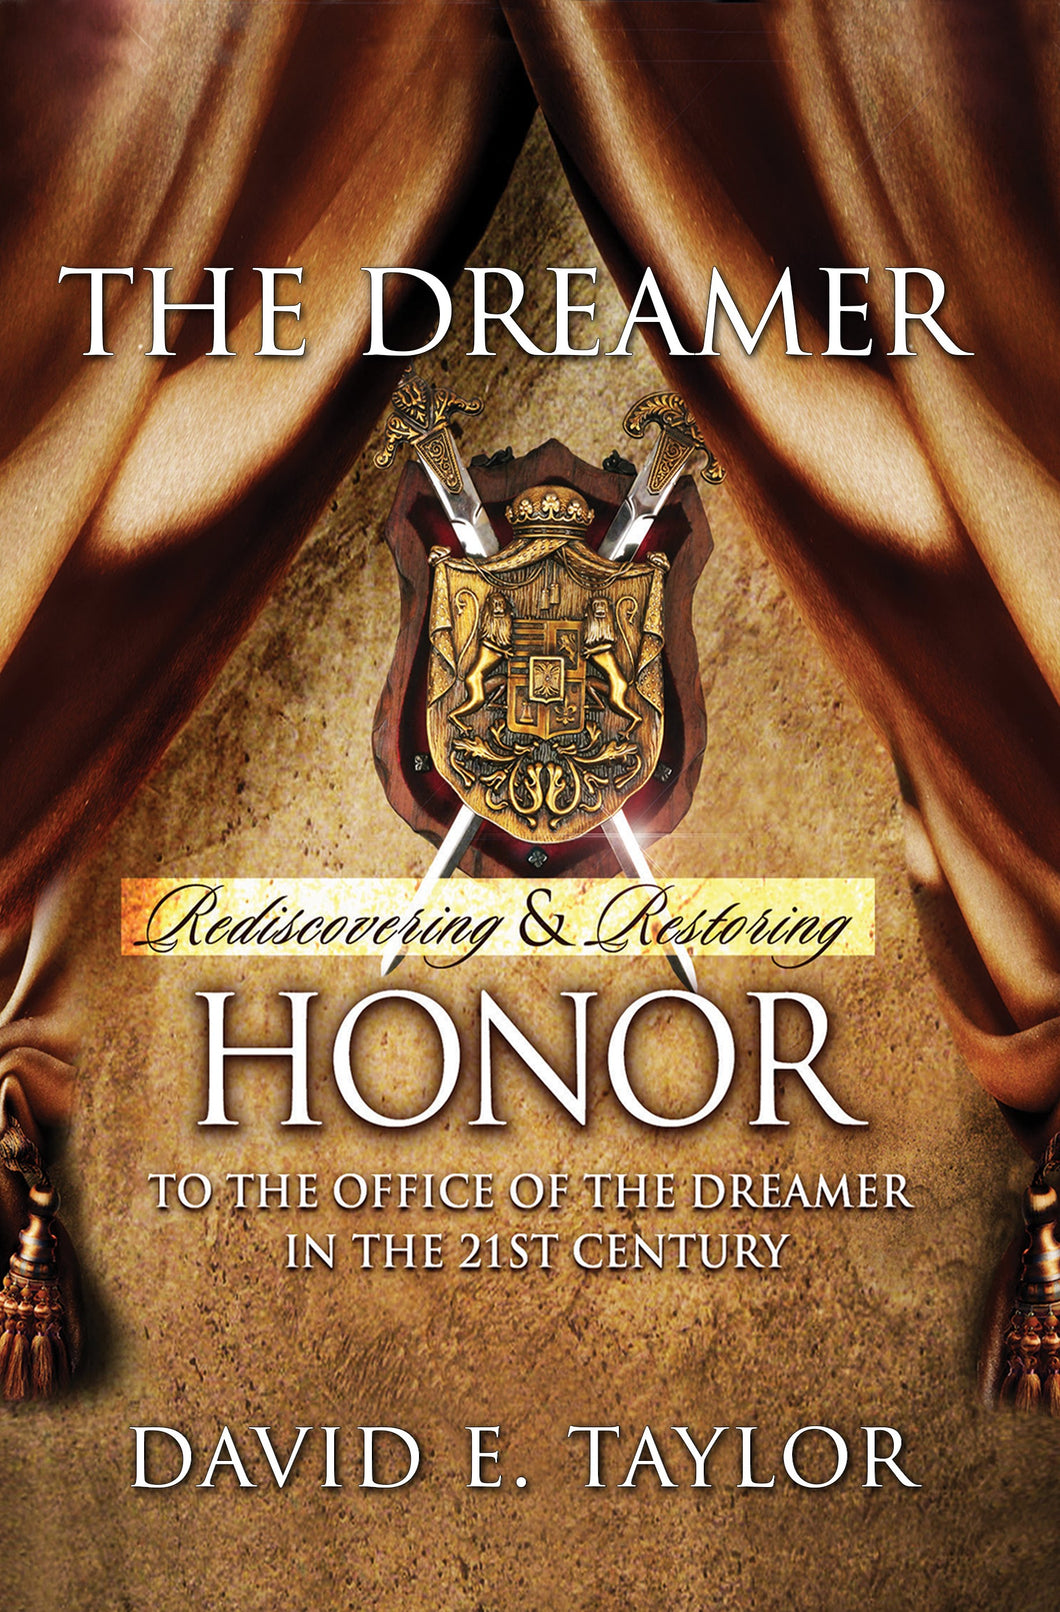 Rediscovering & Restoring Honor to the Office of the Dreamer in the 21st Century E-Book